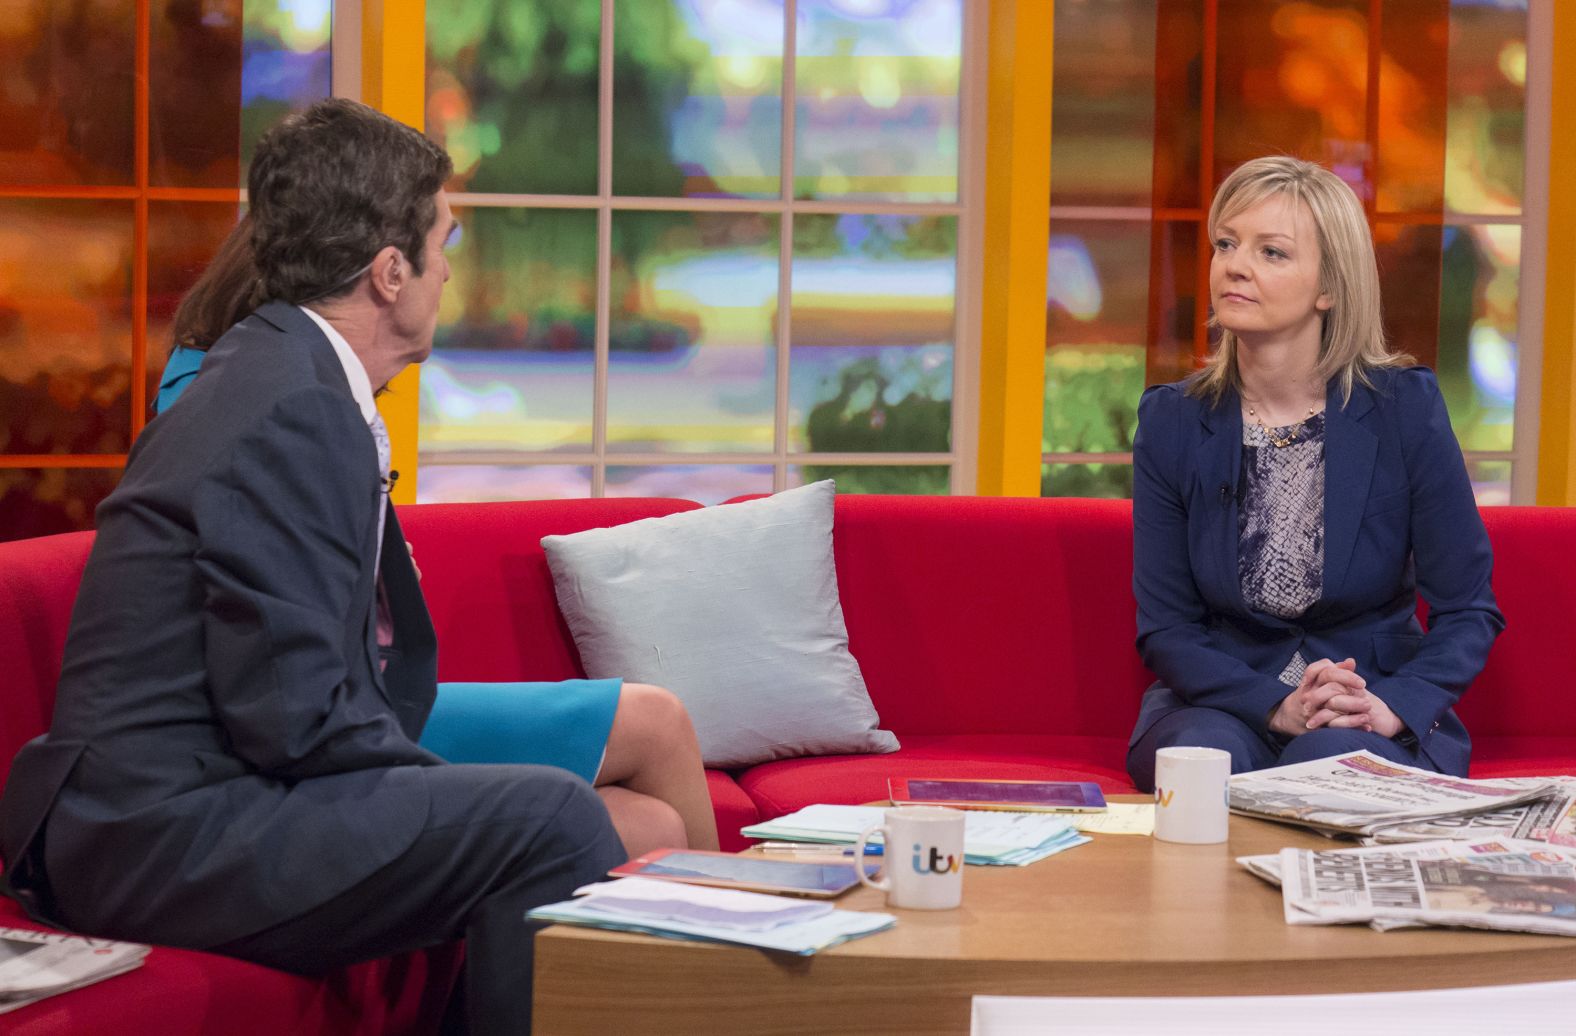 Truss appears with John Stapleton on the "Daybreak" television program in February 2014. Truss says she joined the Conservatives in 1996, just two years after she gave a speech at a Liberal Democrat conference calling for the end of the monarchy.